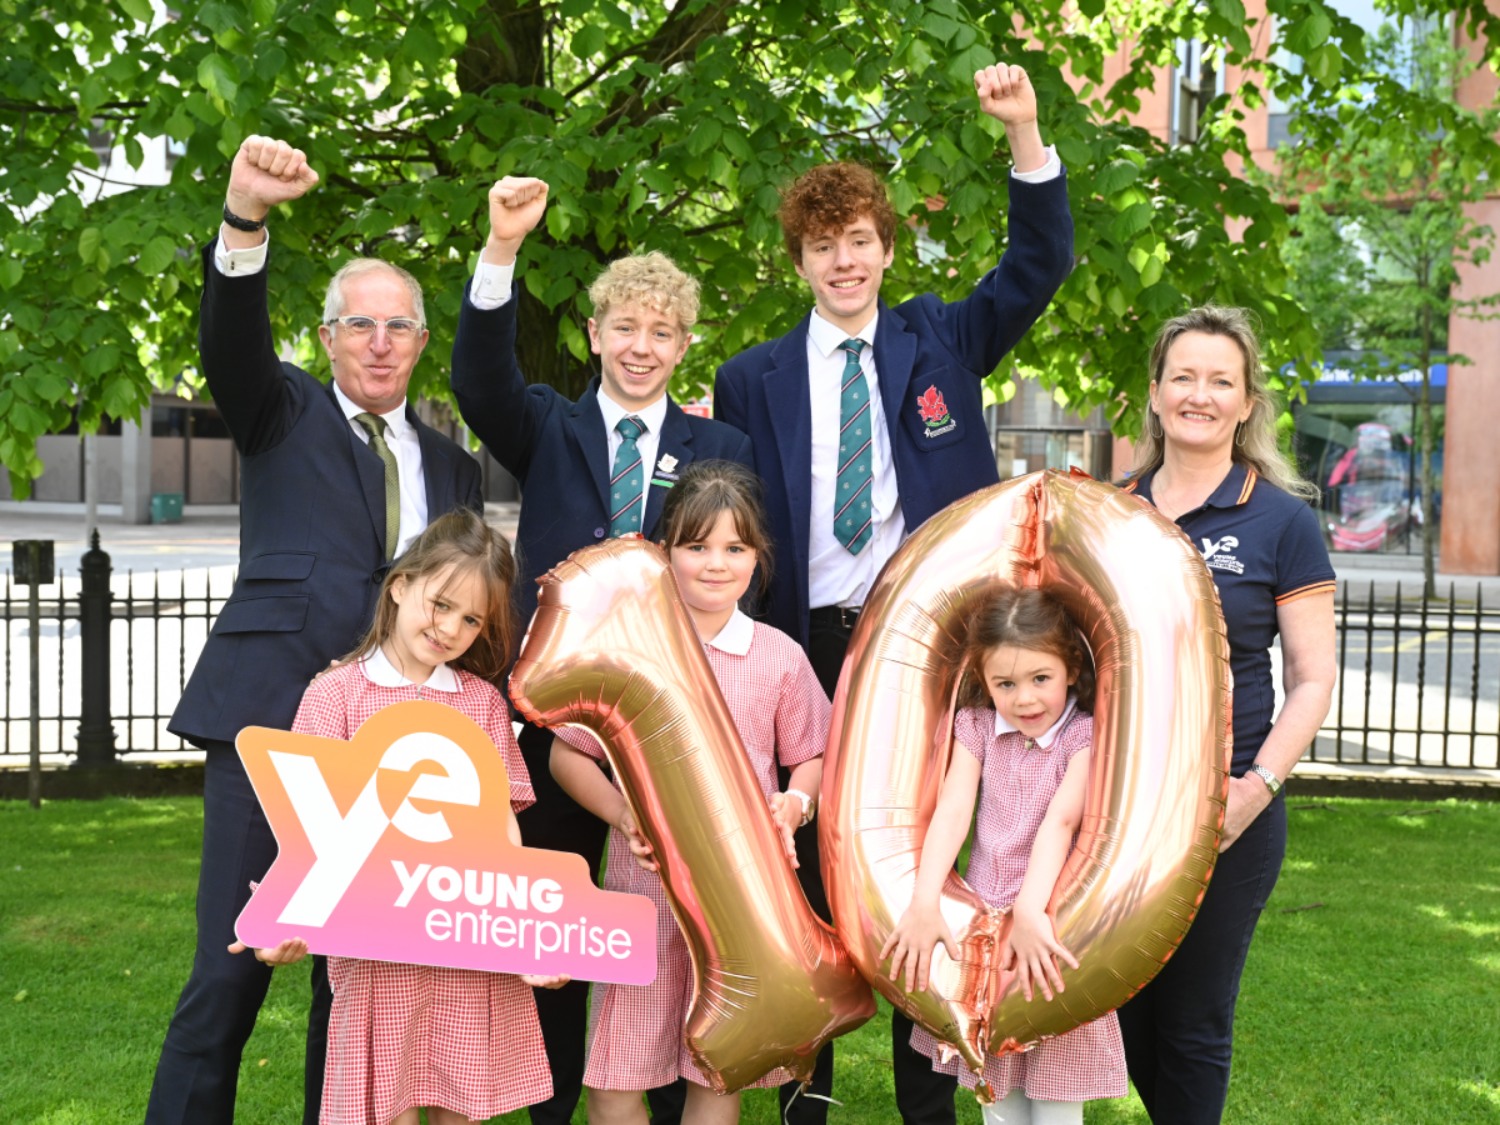 George Higginson and Carol Fitzsimons with a few young people smiling and cheering while holding Young Enterprise Northern Ireland logo and balloons depicting number ten